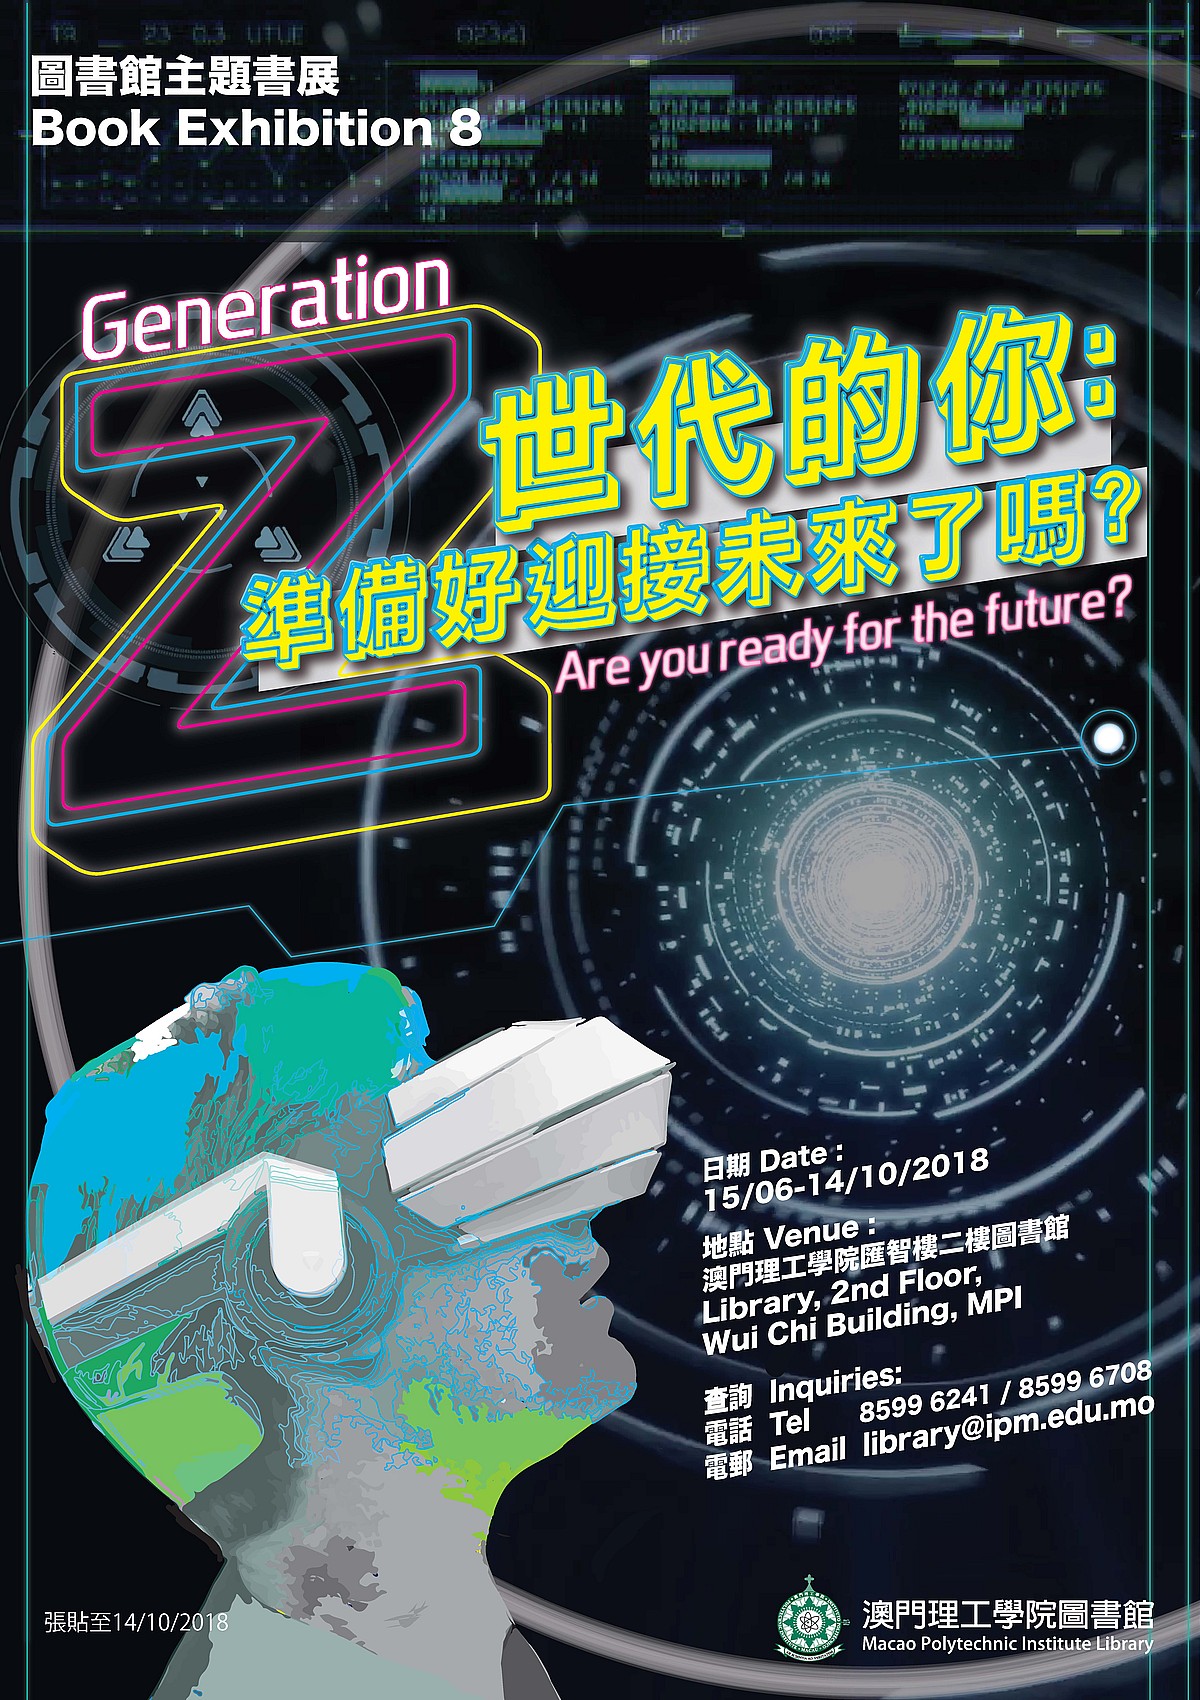 LIBRARY BOOK EXHIBITION 8 - Generation Z: Are You Ready for the Future?